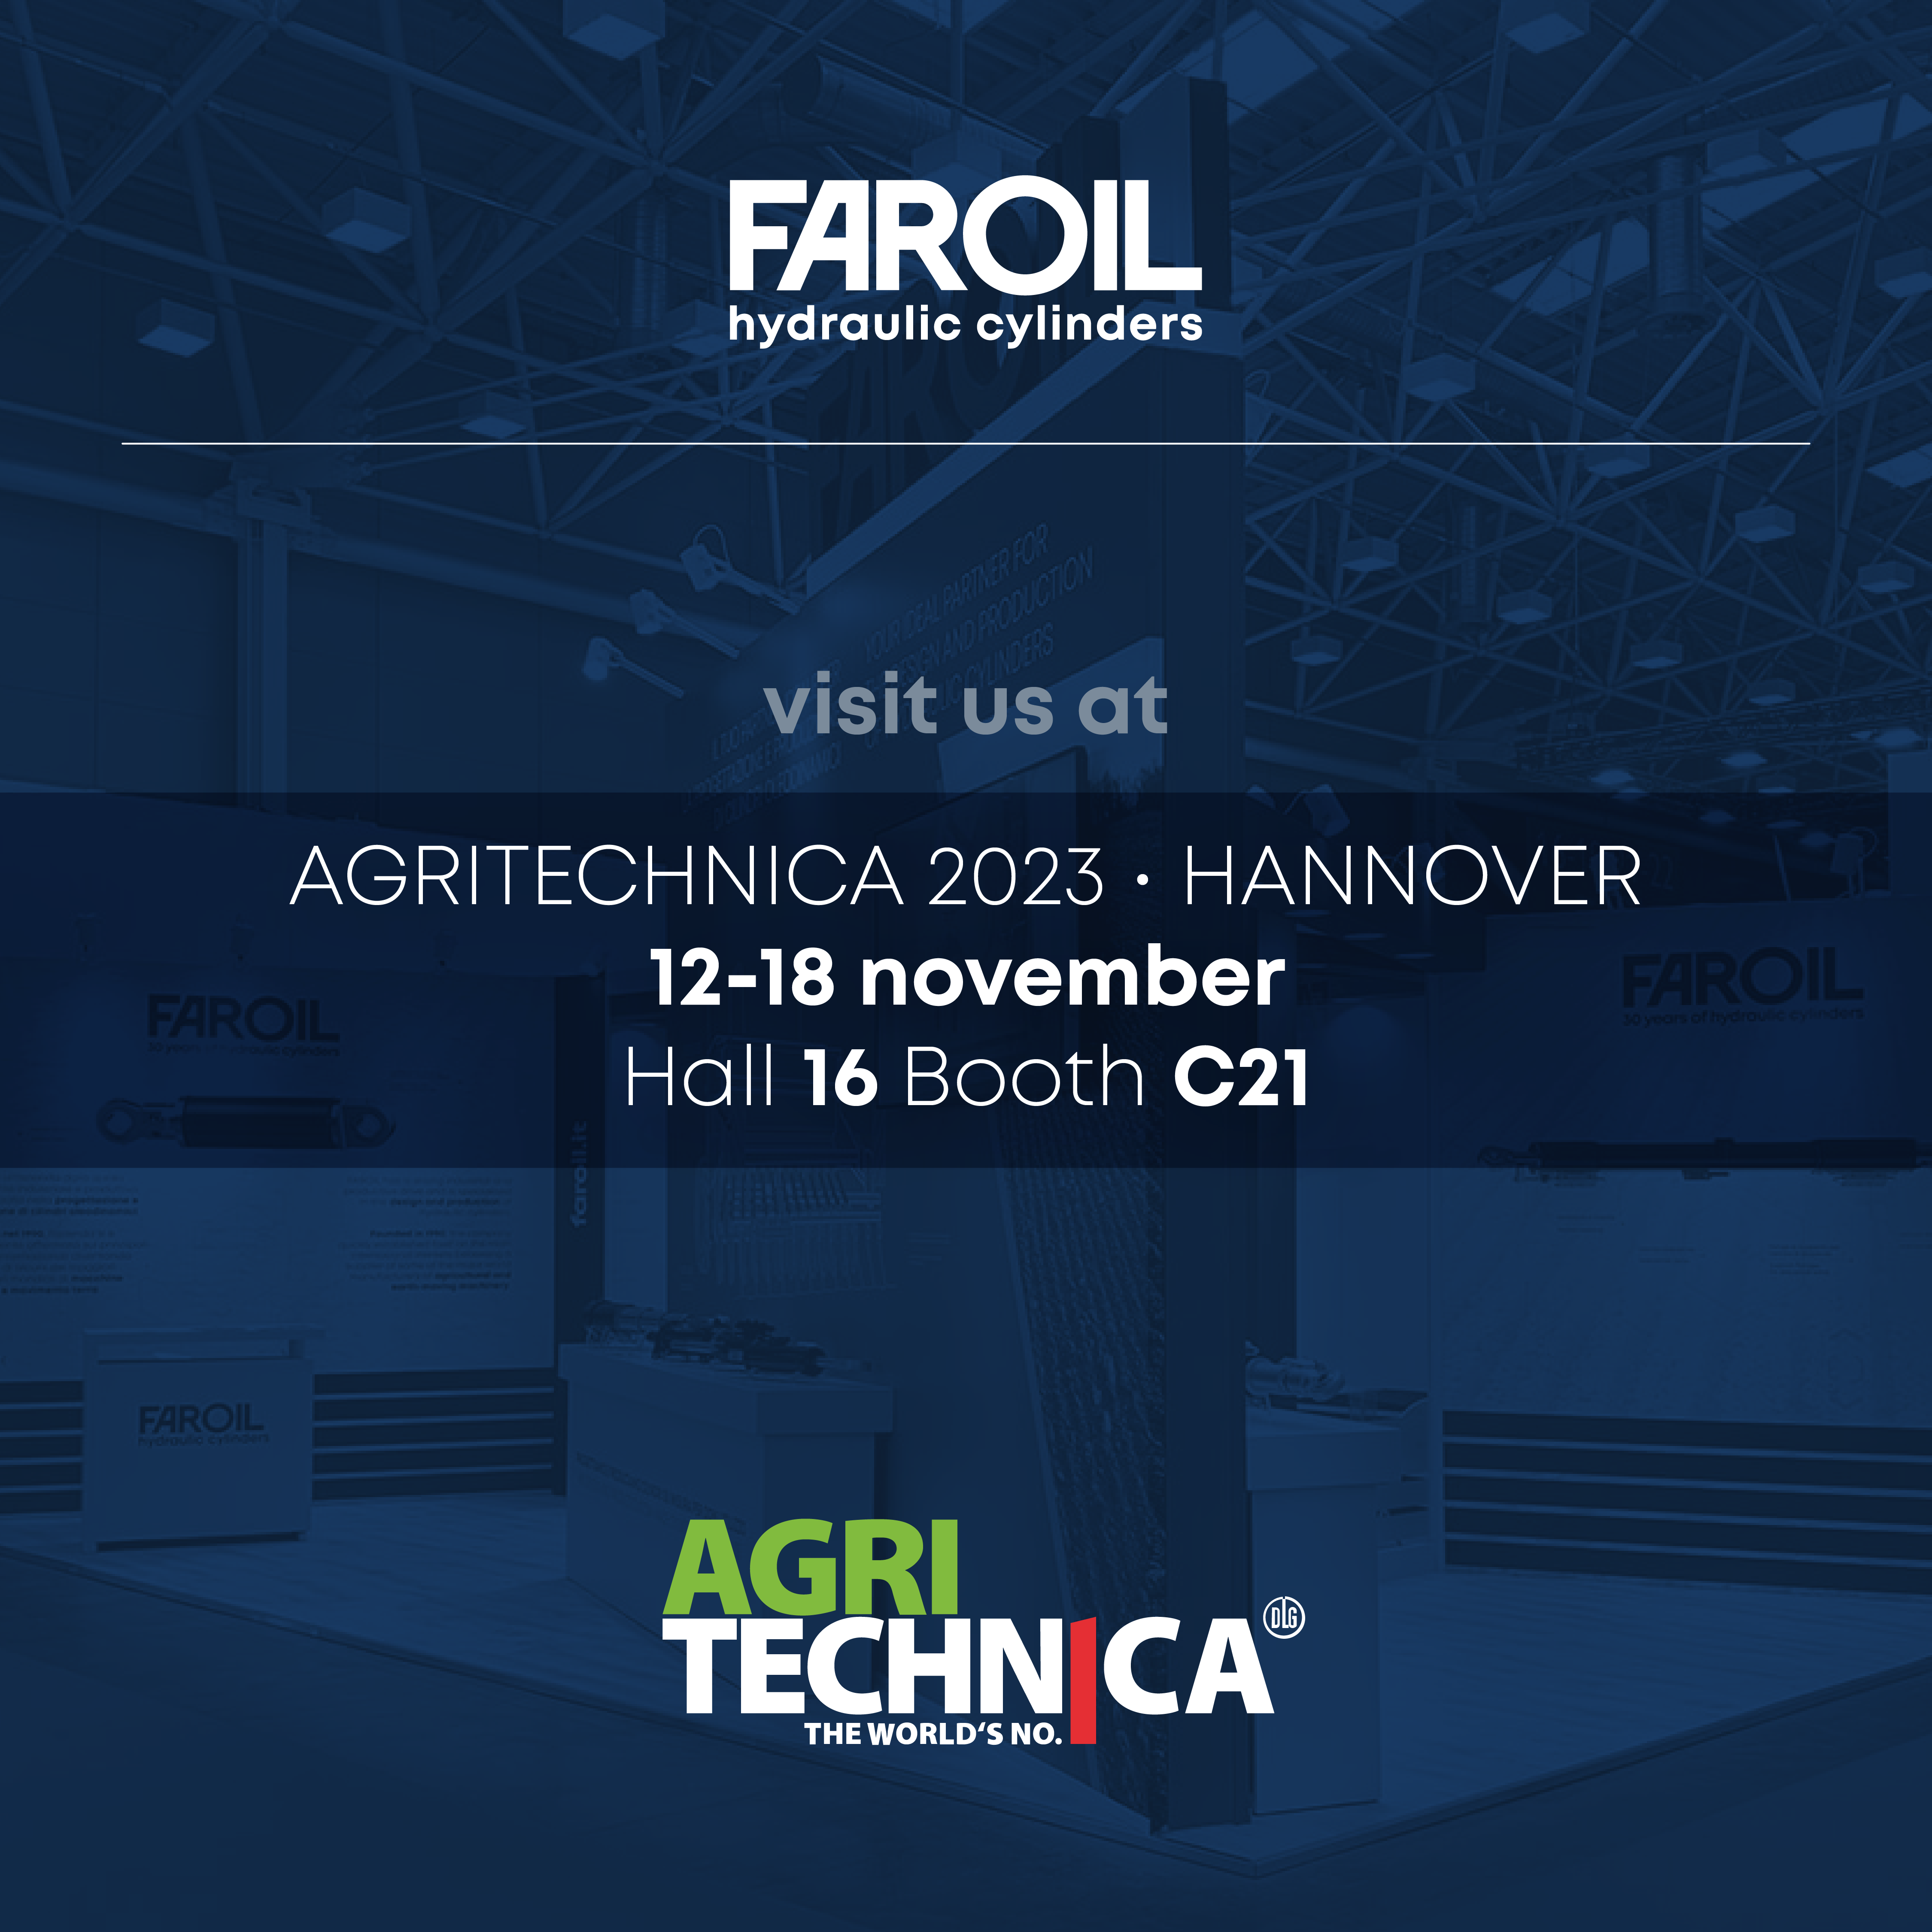 Faroil at Agritechnica 2023